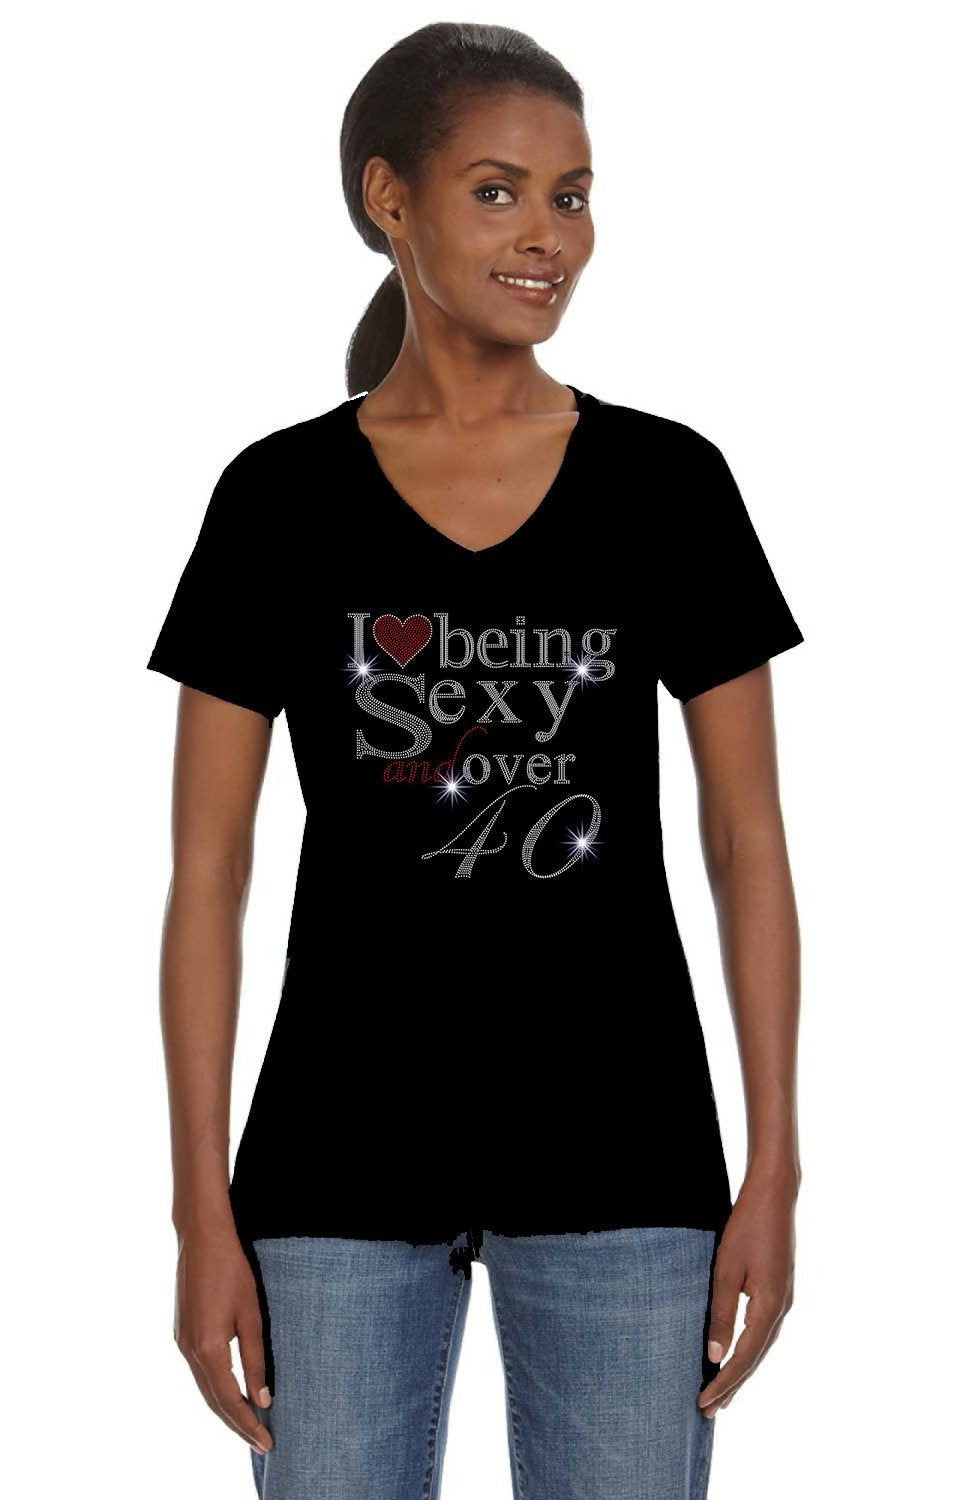 Sexy and Over 40 Crystallized Tee